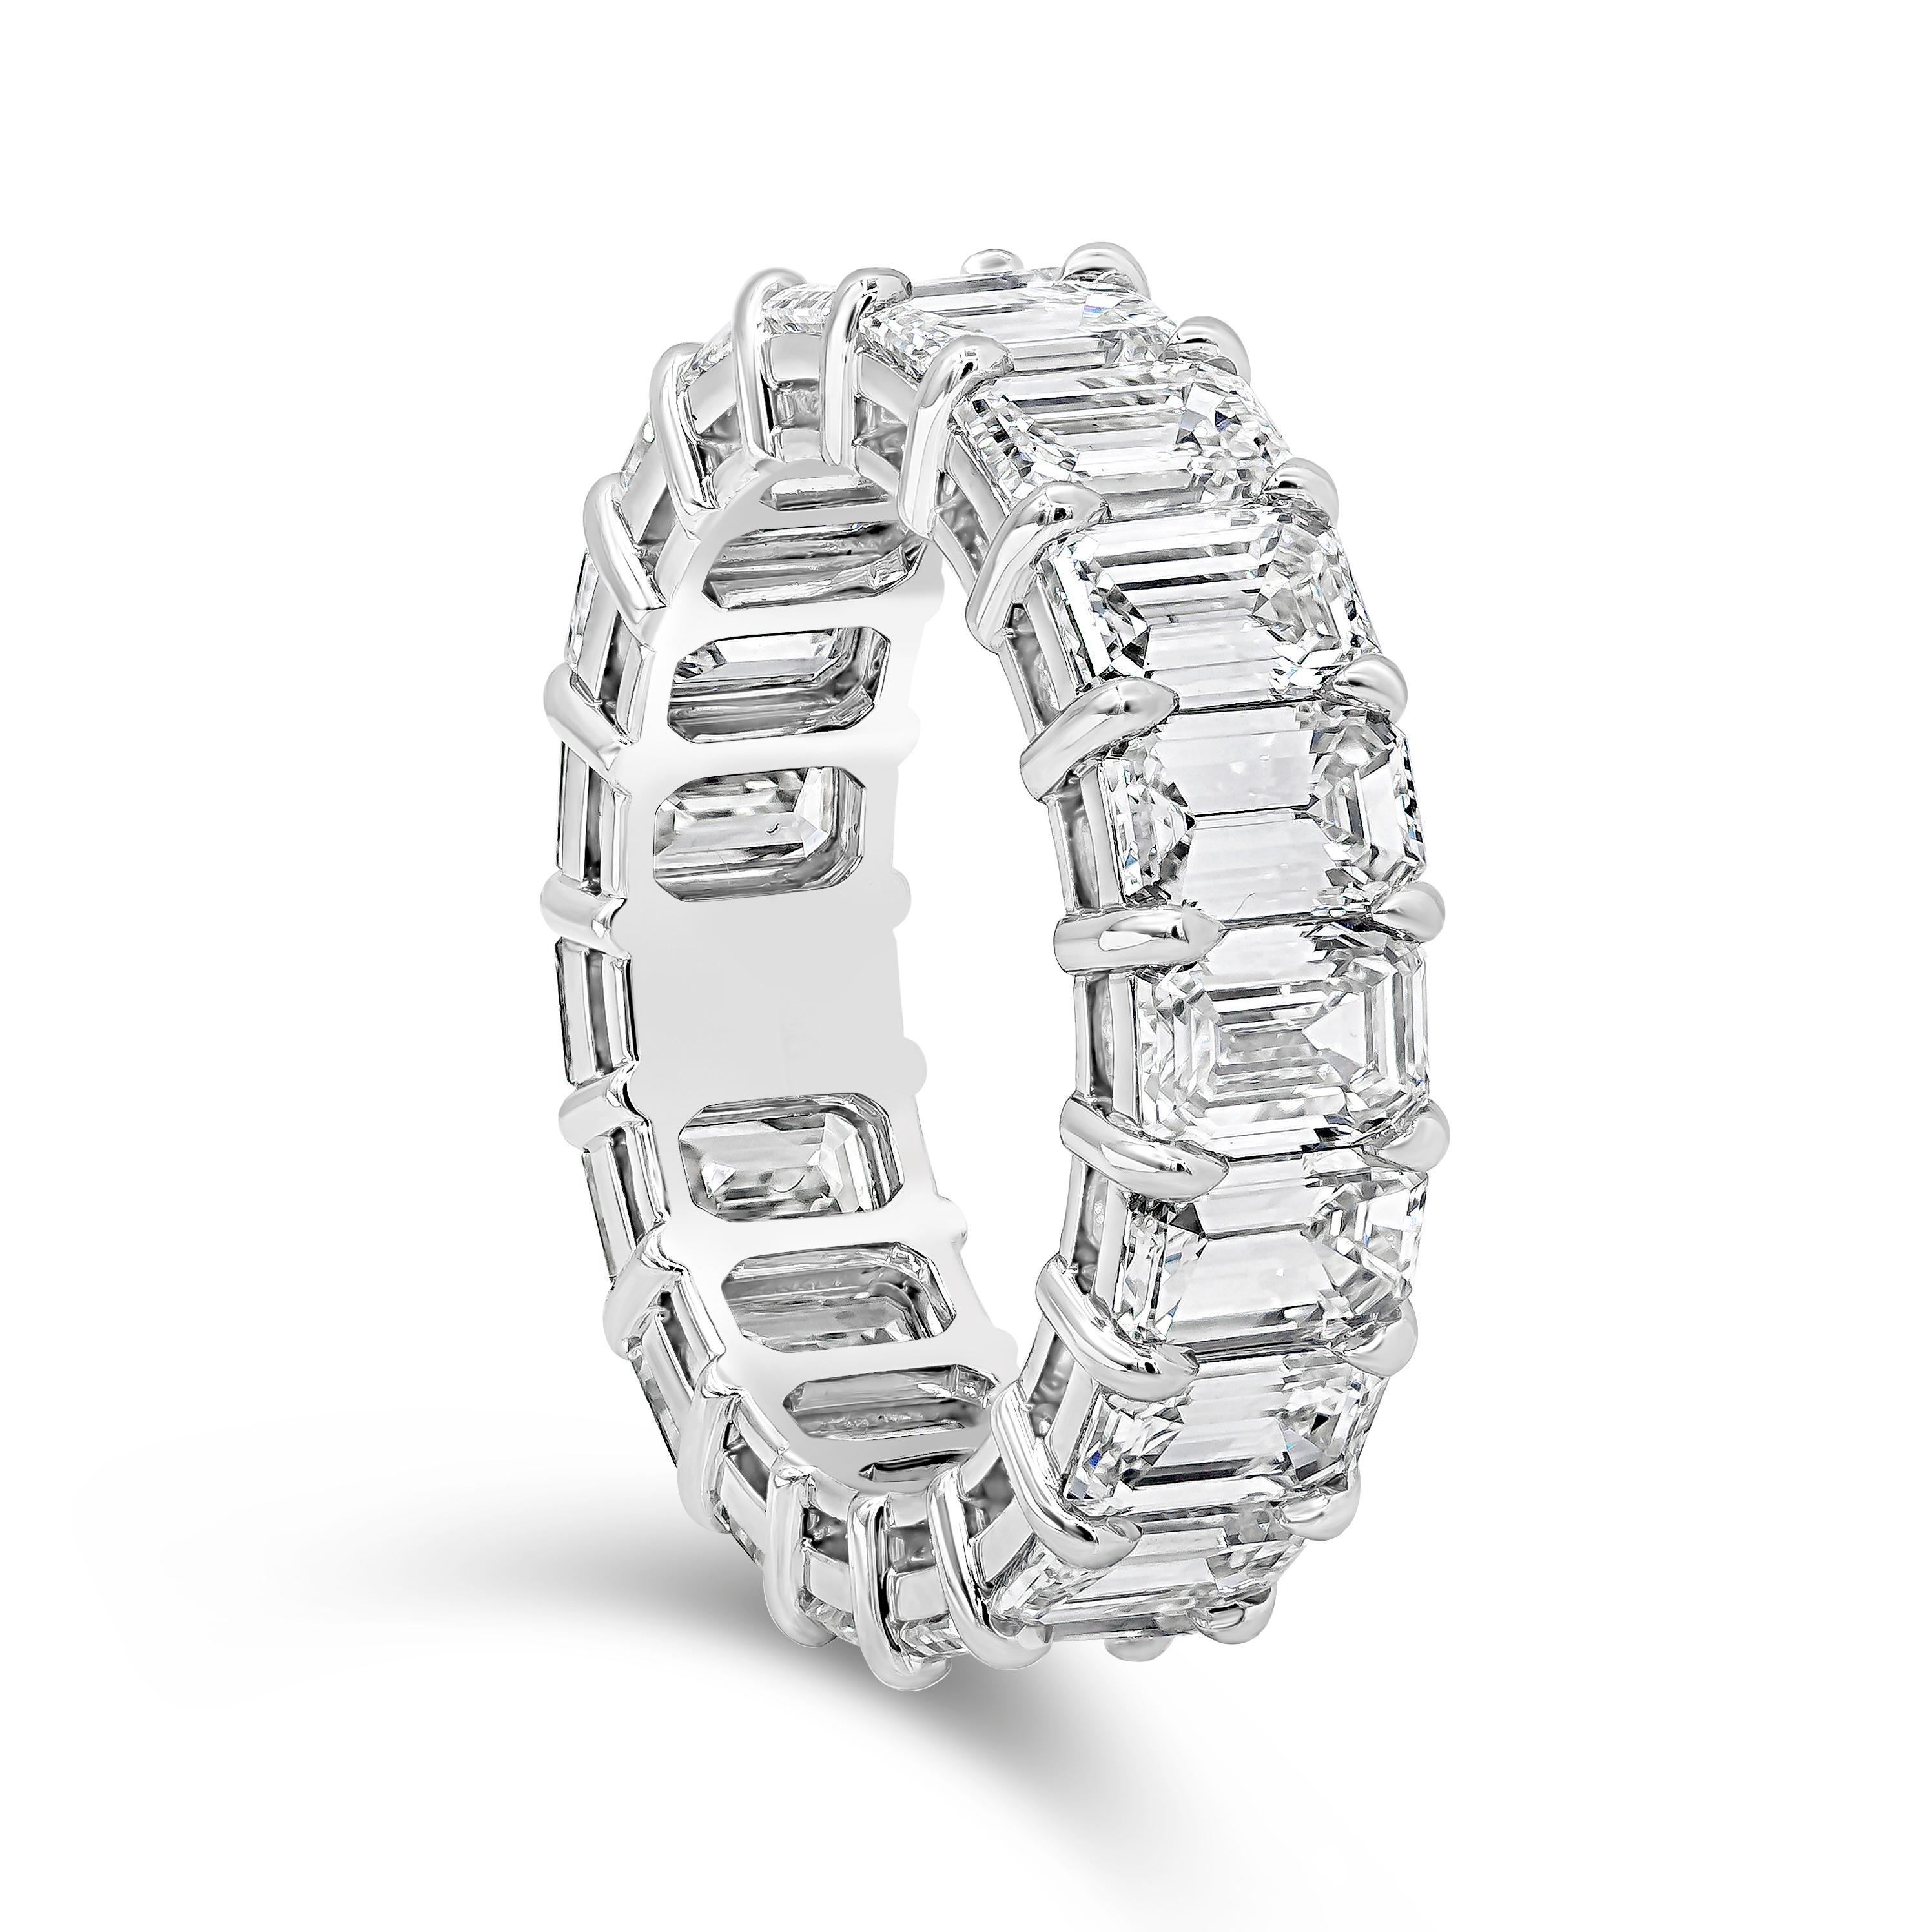 An elegant and classic wedding band showcasing a row of emerald cut diamonds weighing 7.80 carats total, set in a shared prong mounting made in platinum. Diamonds are approximately E-F color, VS+ clarity. 

Style available in different price ranges.